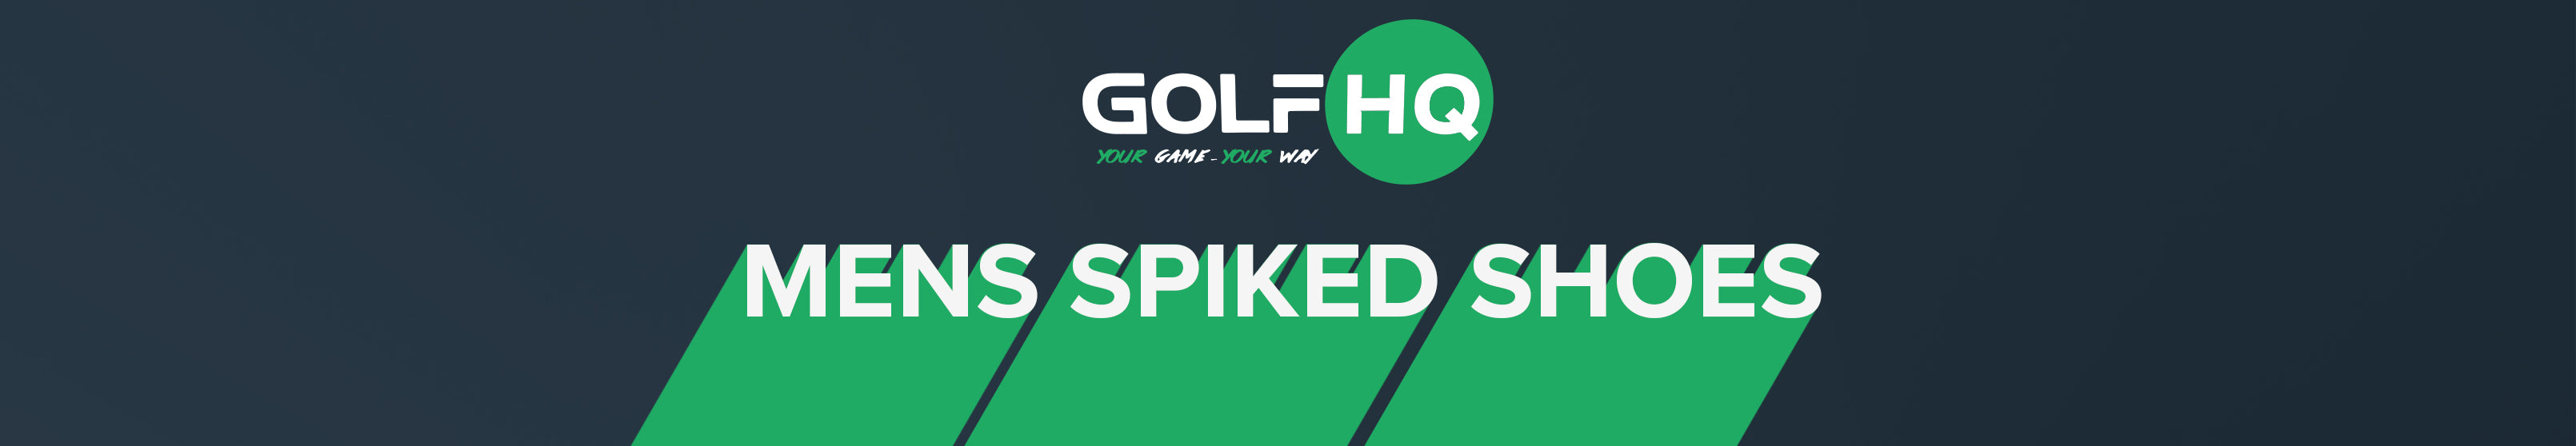 Mens Spiked Golf Shoes - Golf HQ